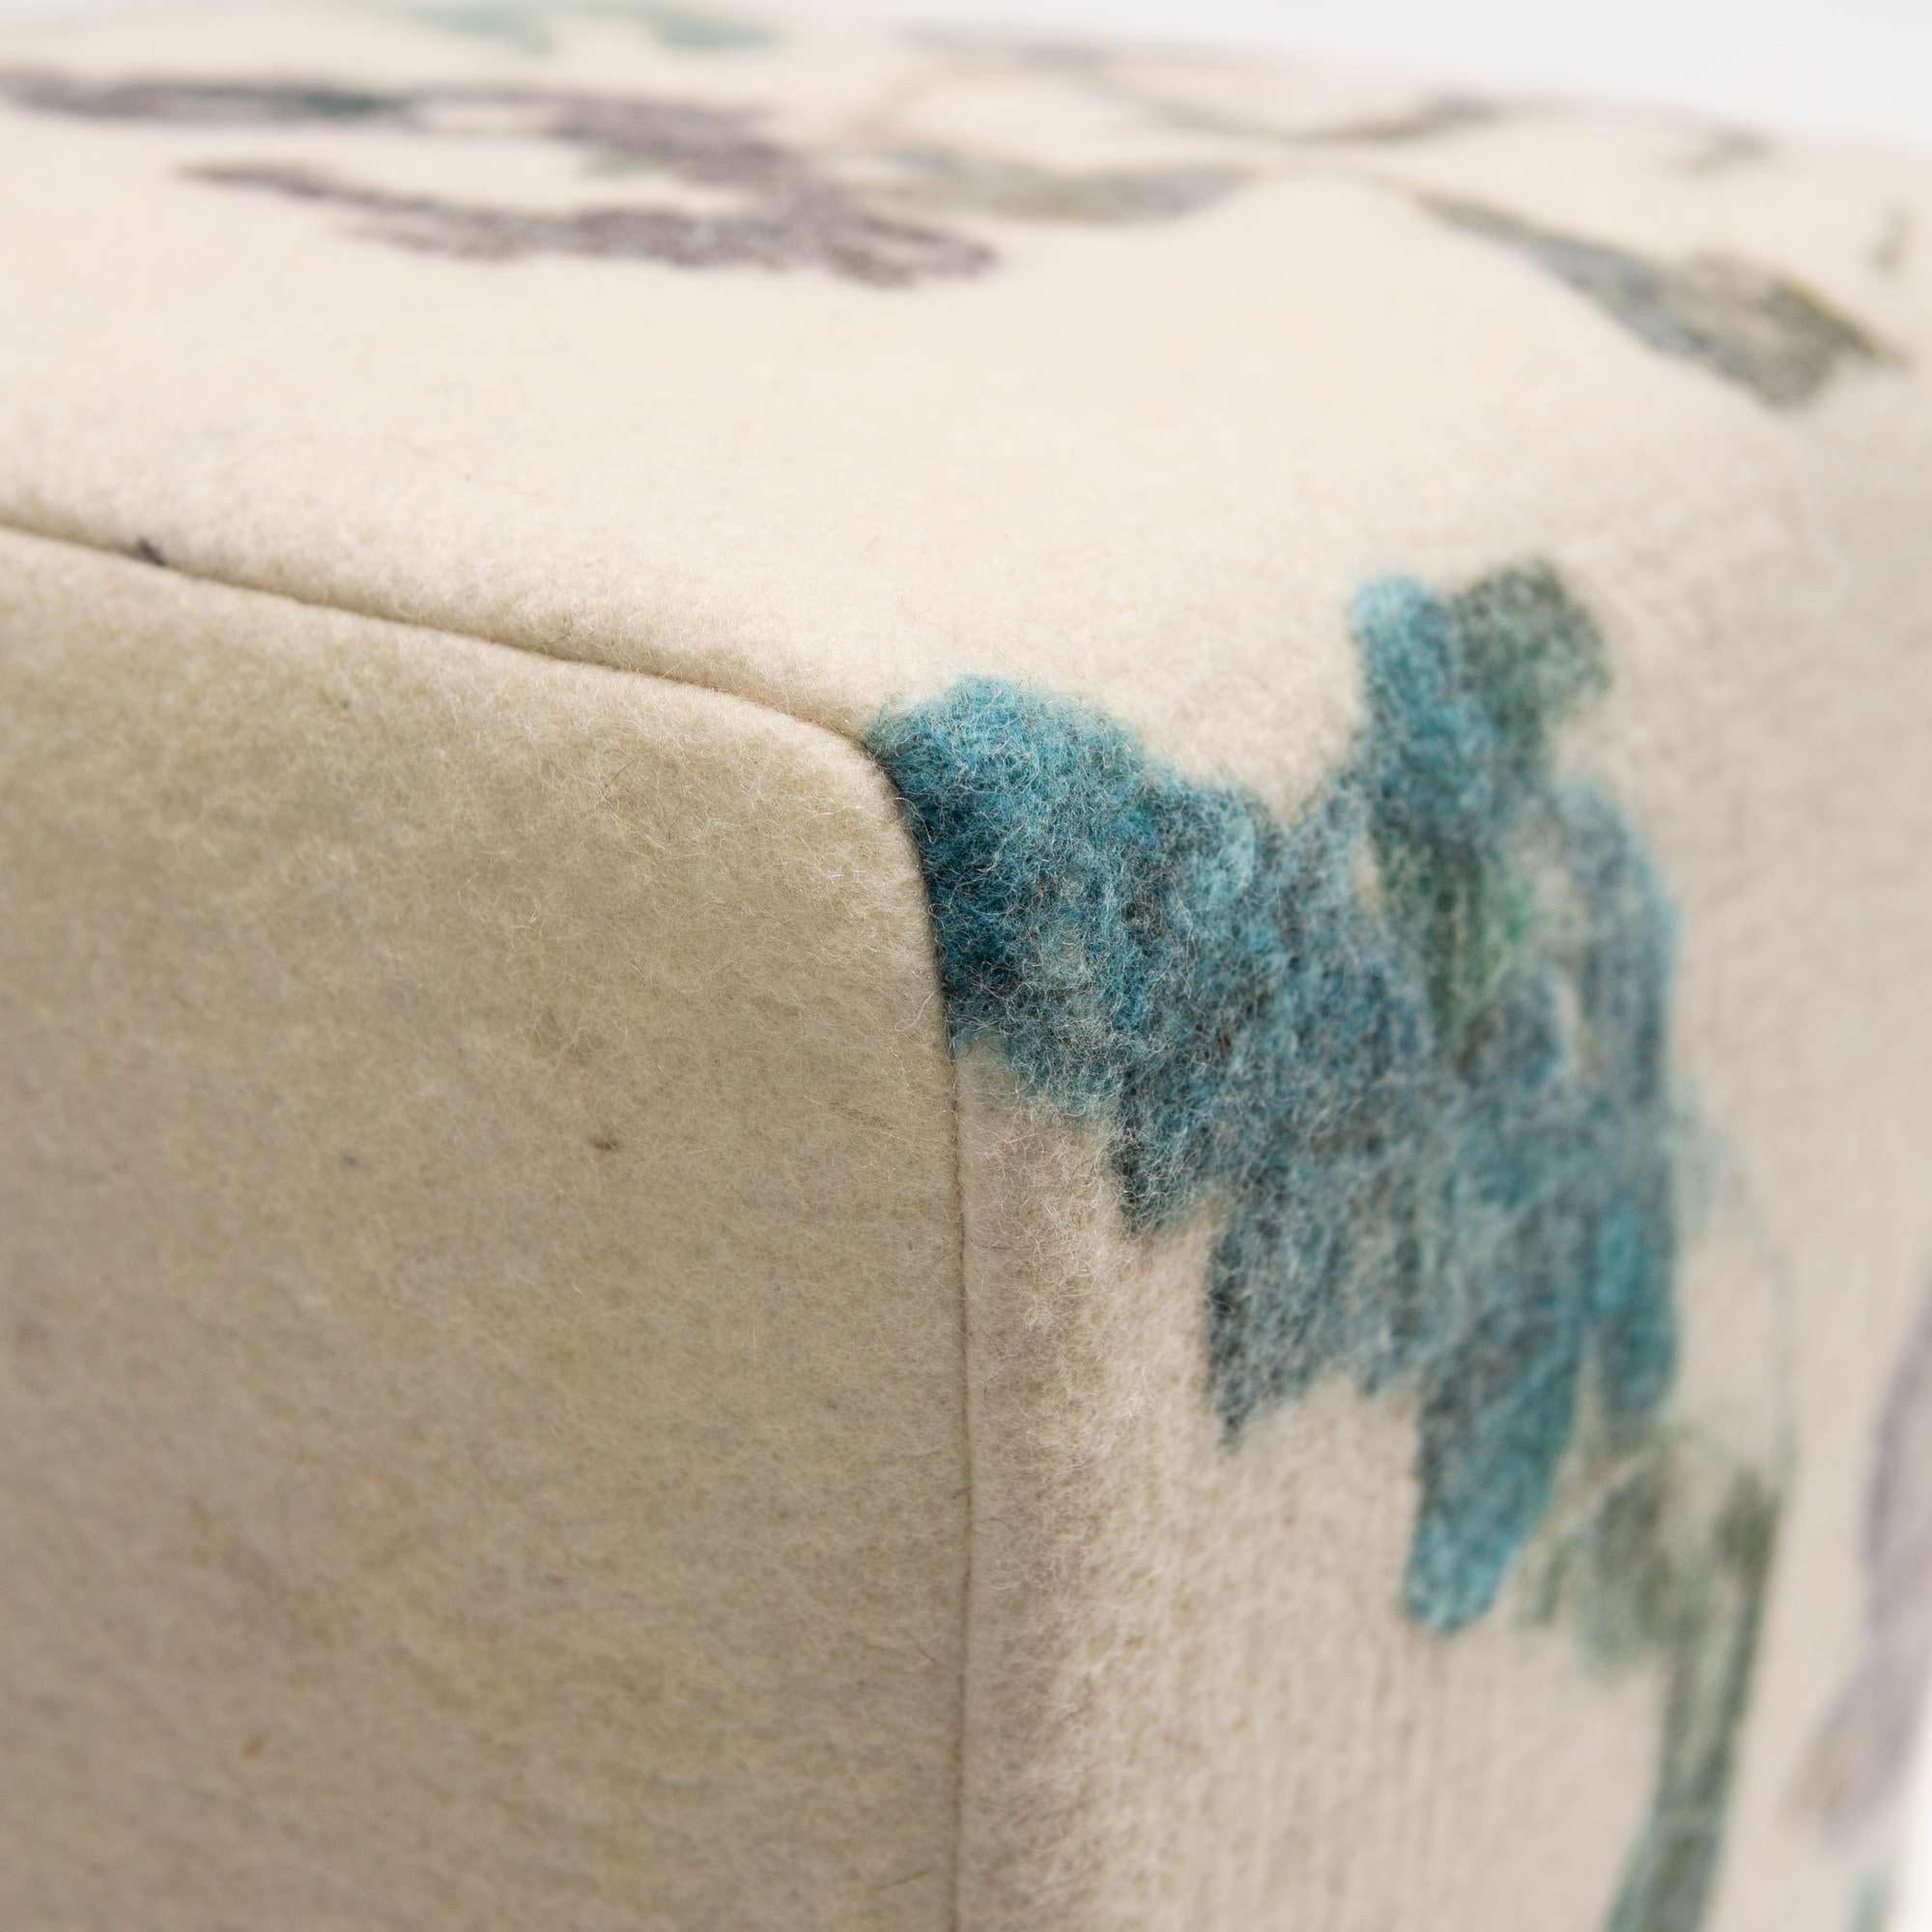 Felted wool fabric made in our workshop, each one one-of-a-kind from our painterly felted wool over a finely upholstered ottoman with wood legs.

The ottoman is manufactured in Portland, Oregon USA by an accomplished fine furniture builder for